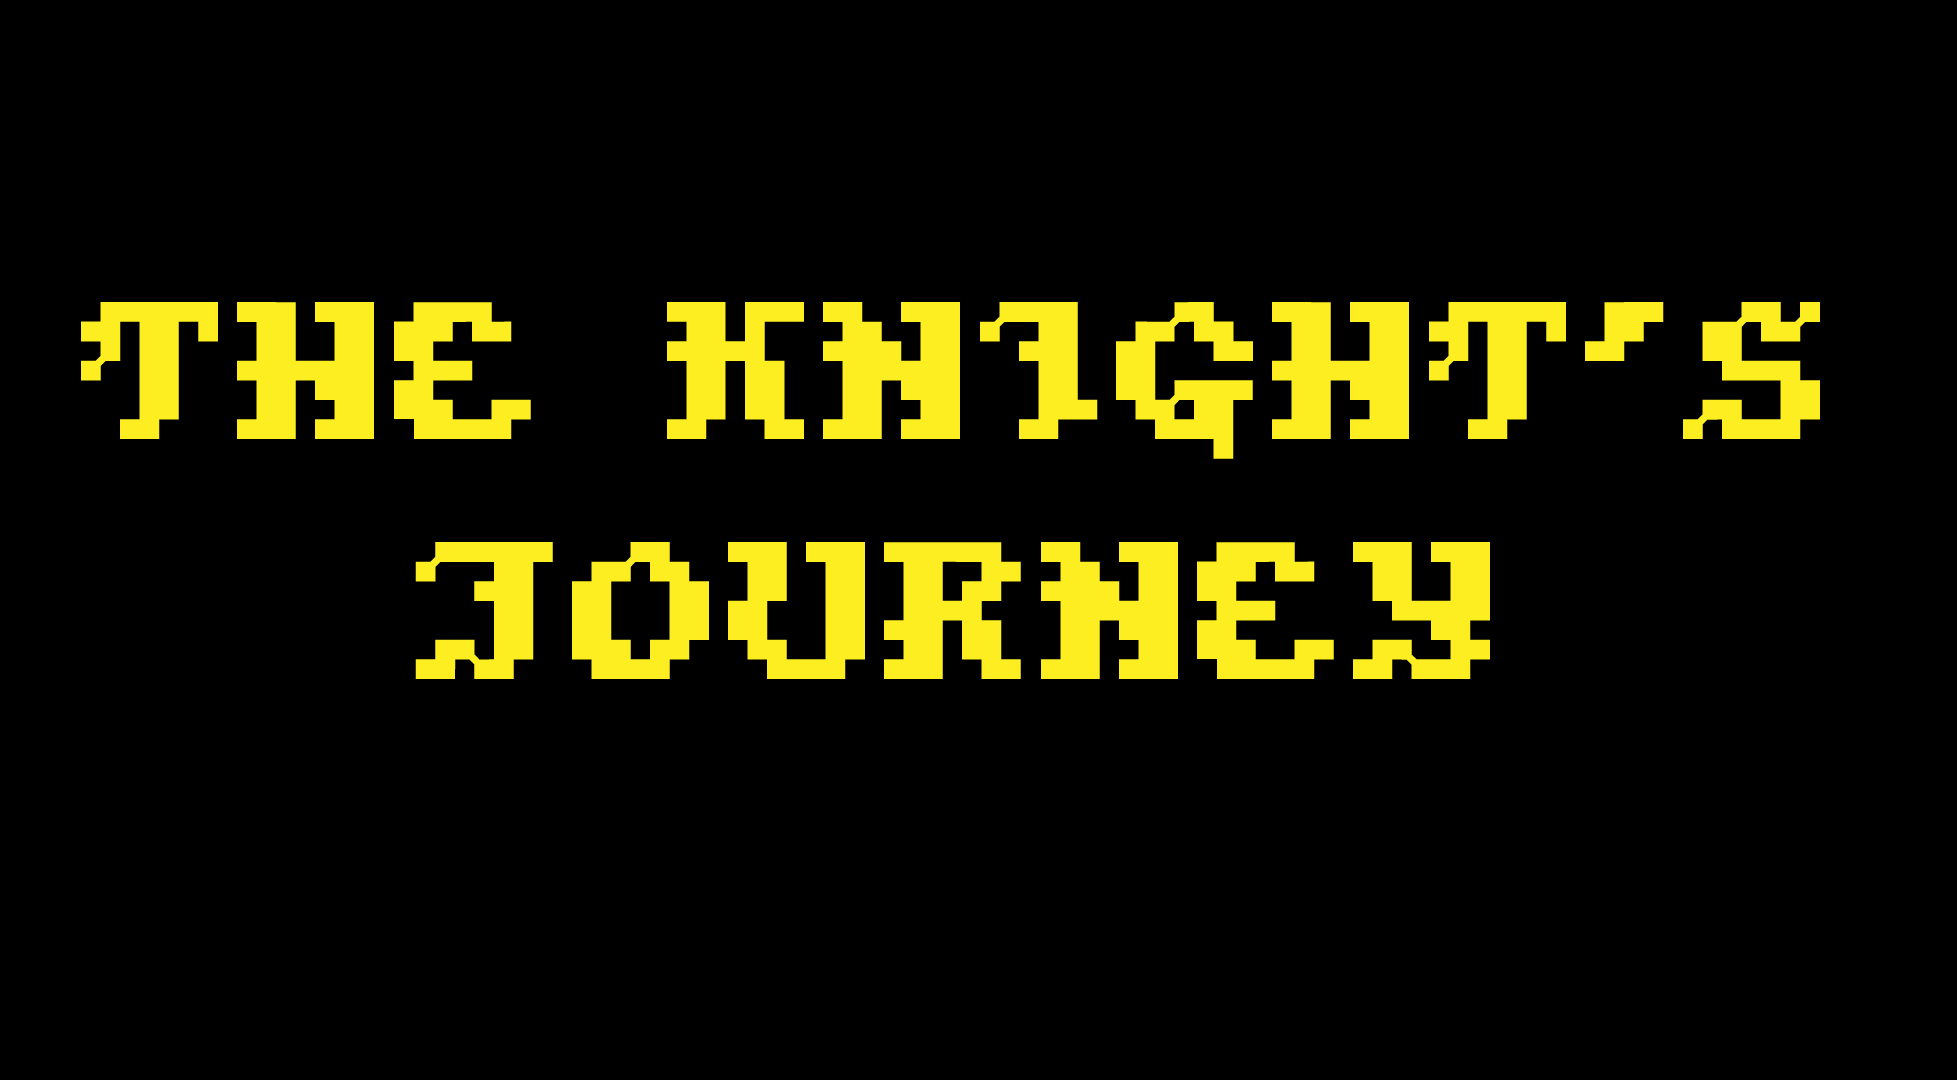 The Knight's Journey